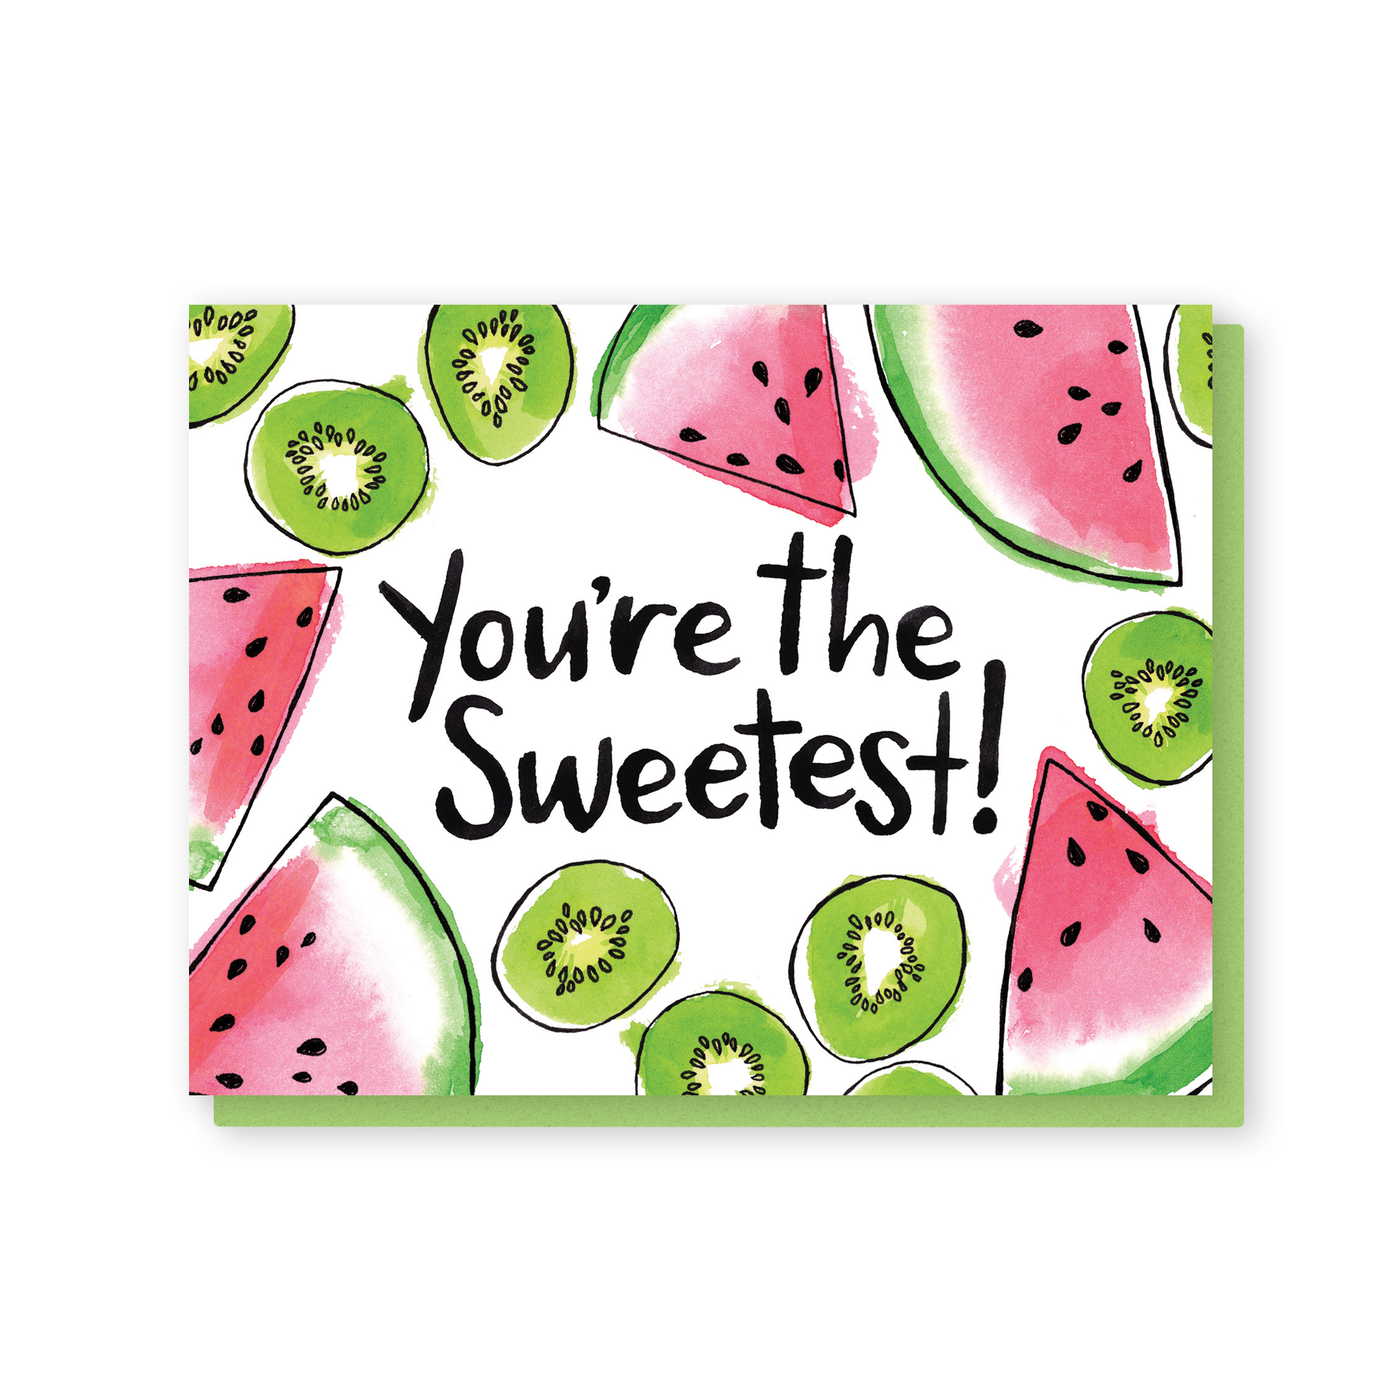 You're the sweetest watermelons and kiwis card